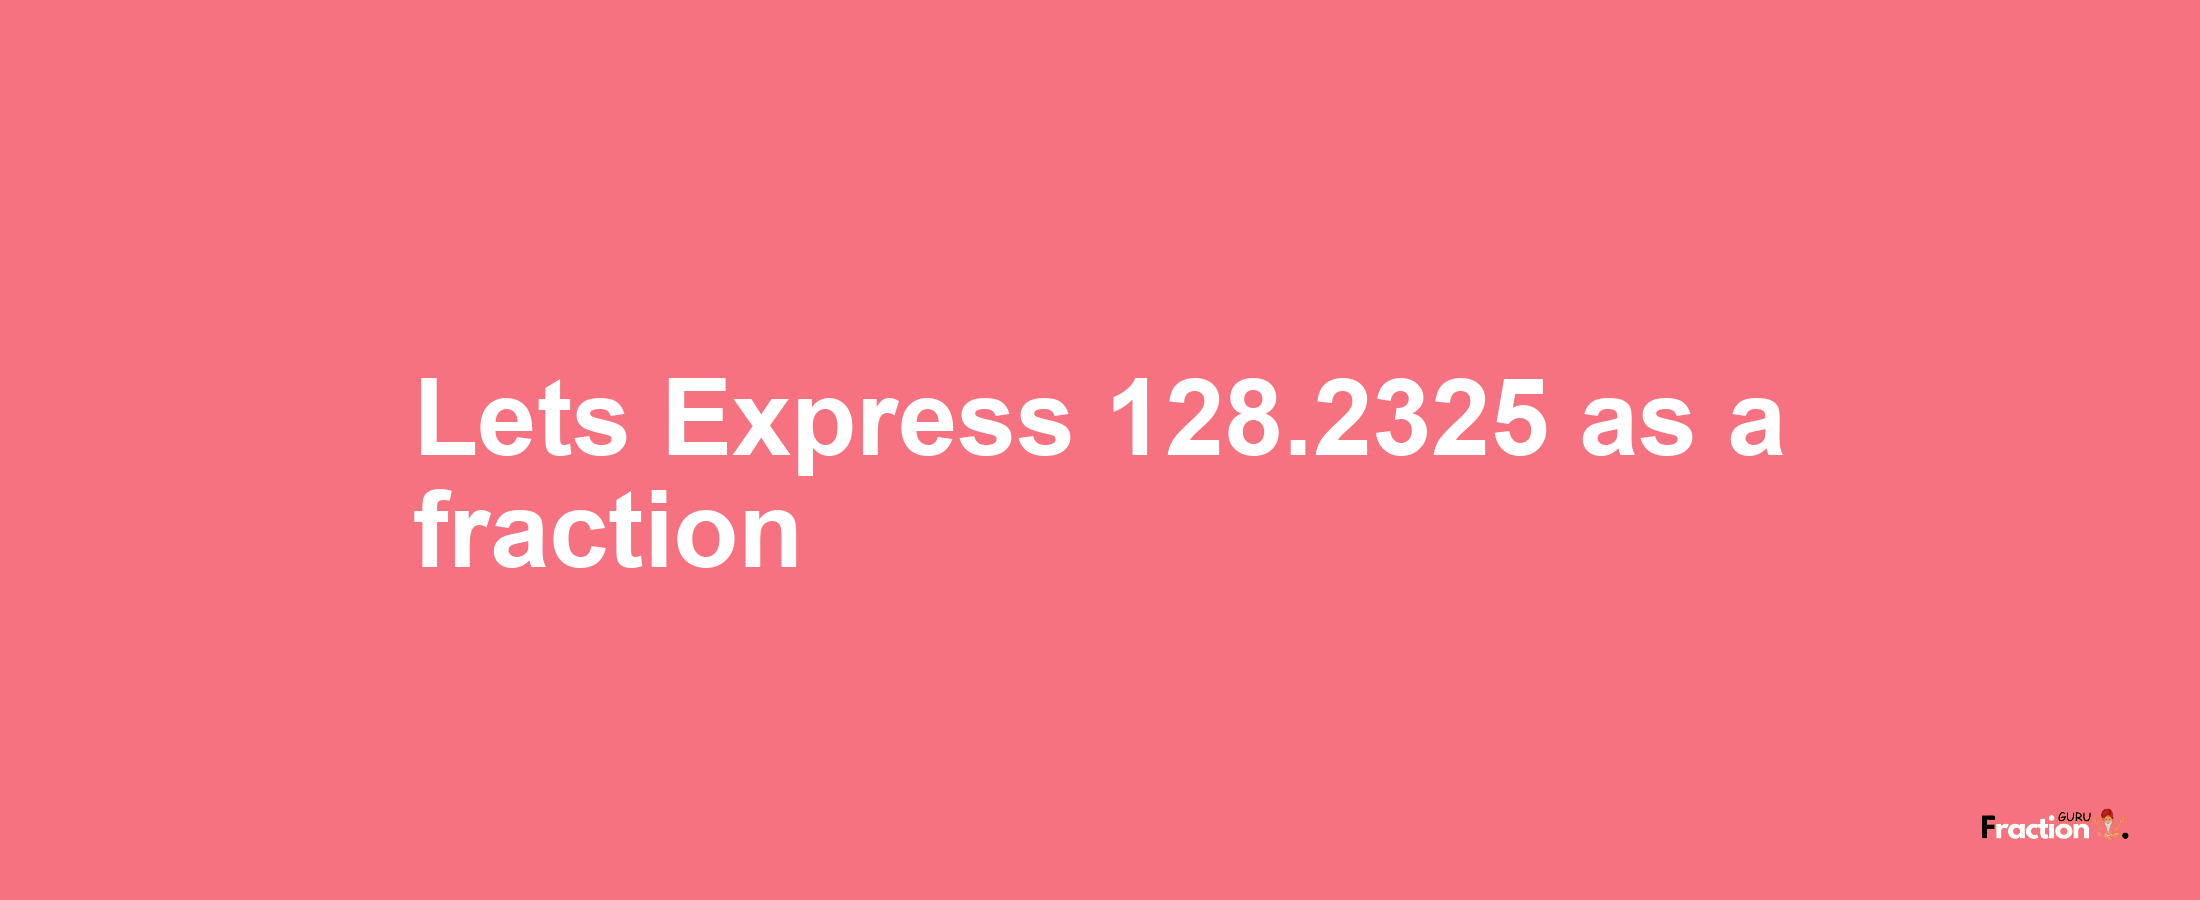 Lets Express 128.2325 as afraction